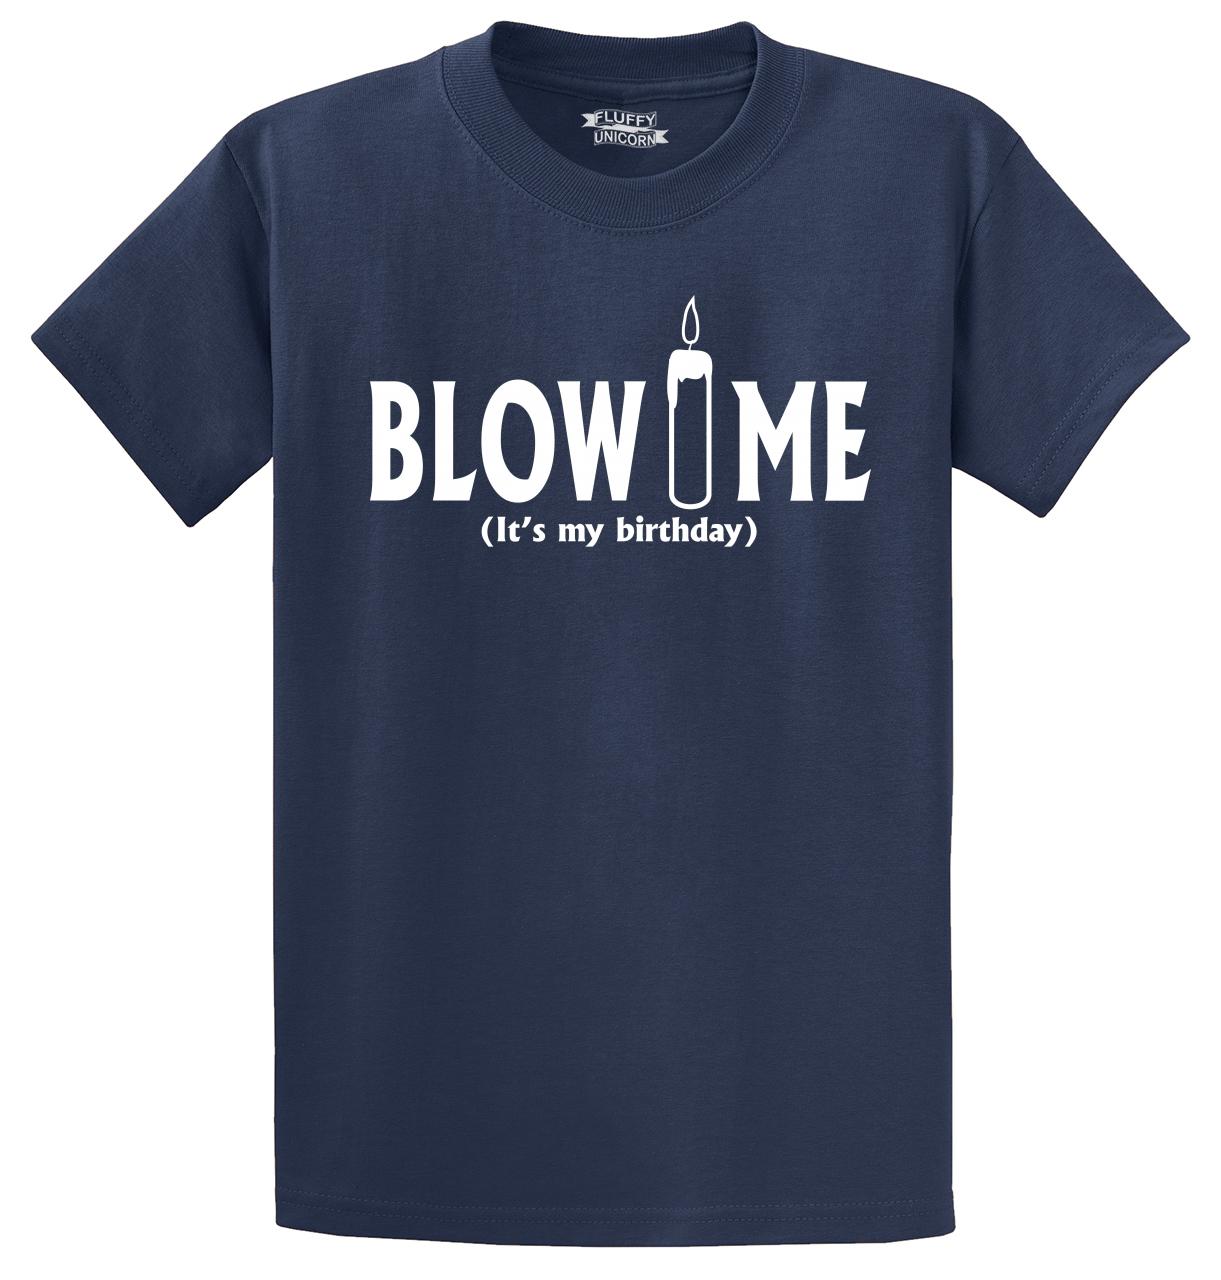 Blow Me Its My Birthday Funny T Shirt Cute B Day T Party Tee S 5xl